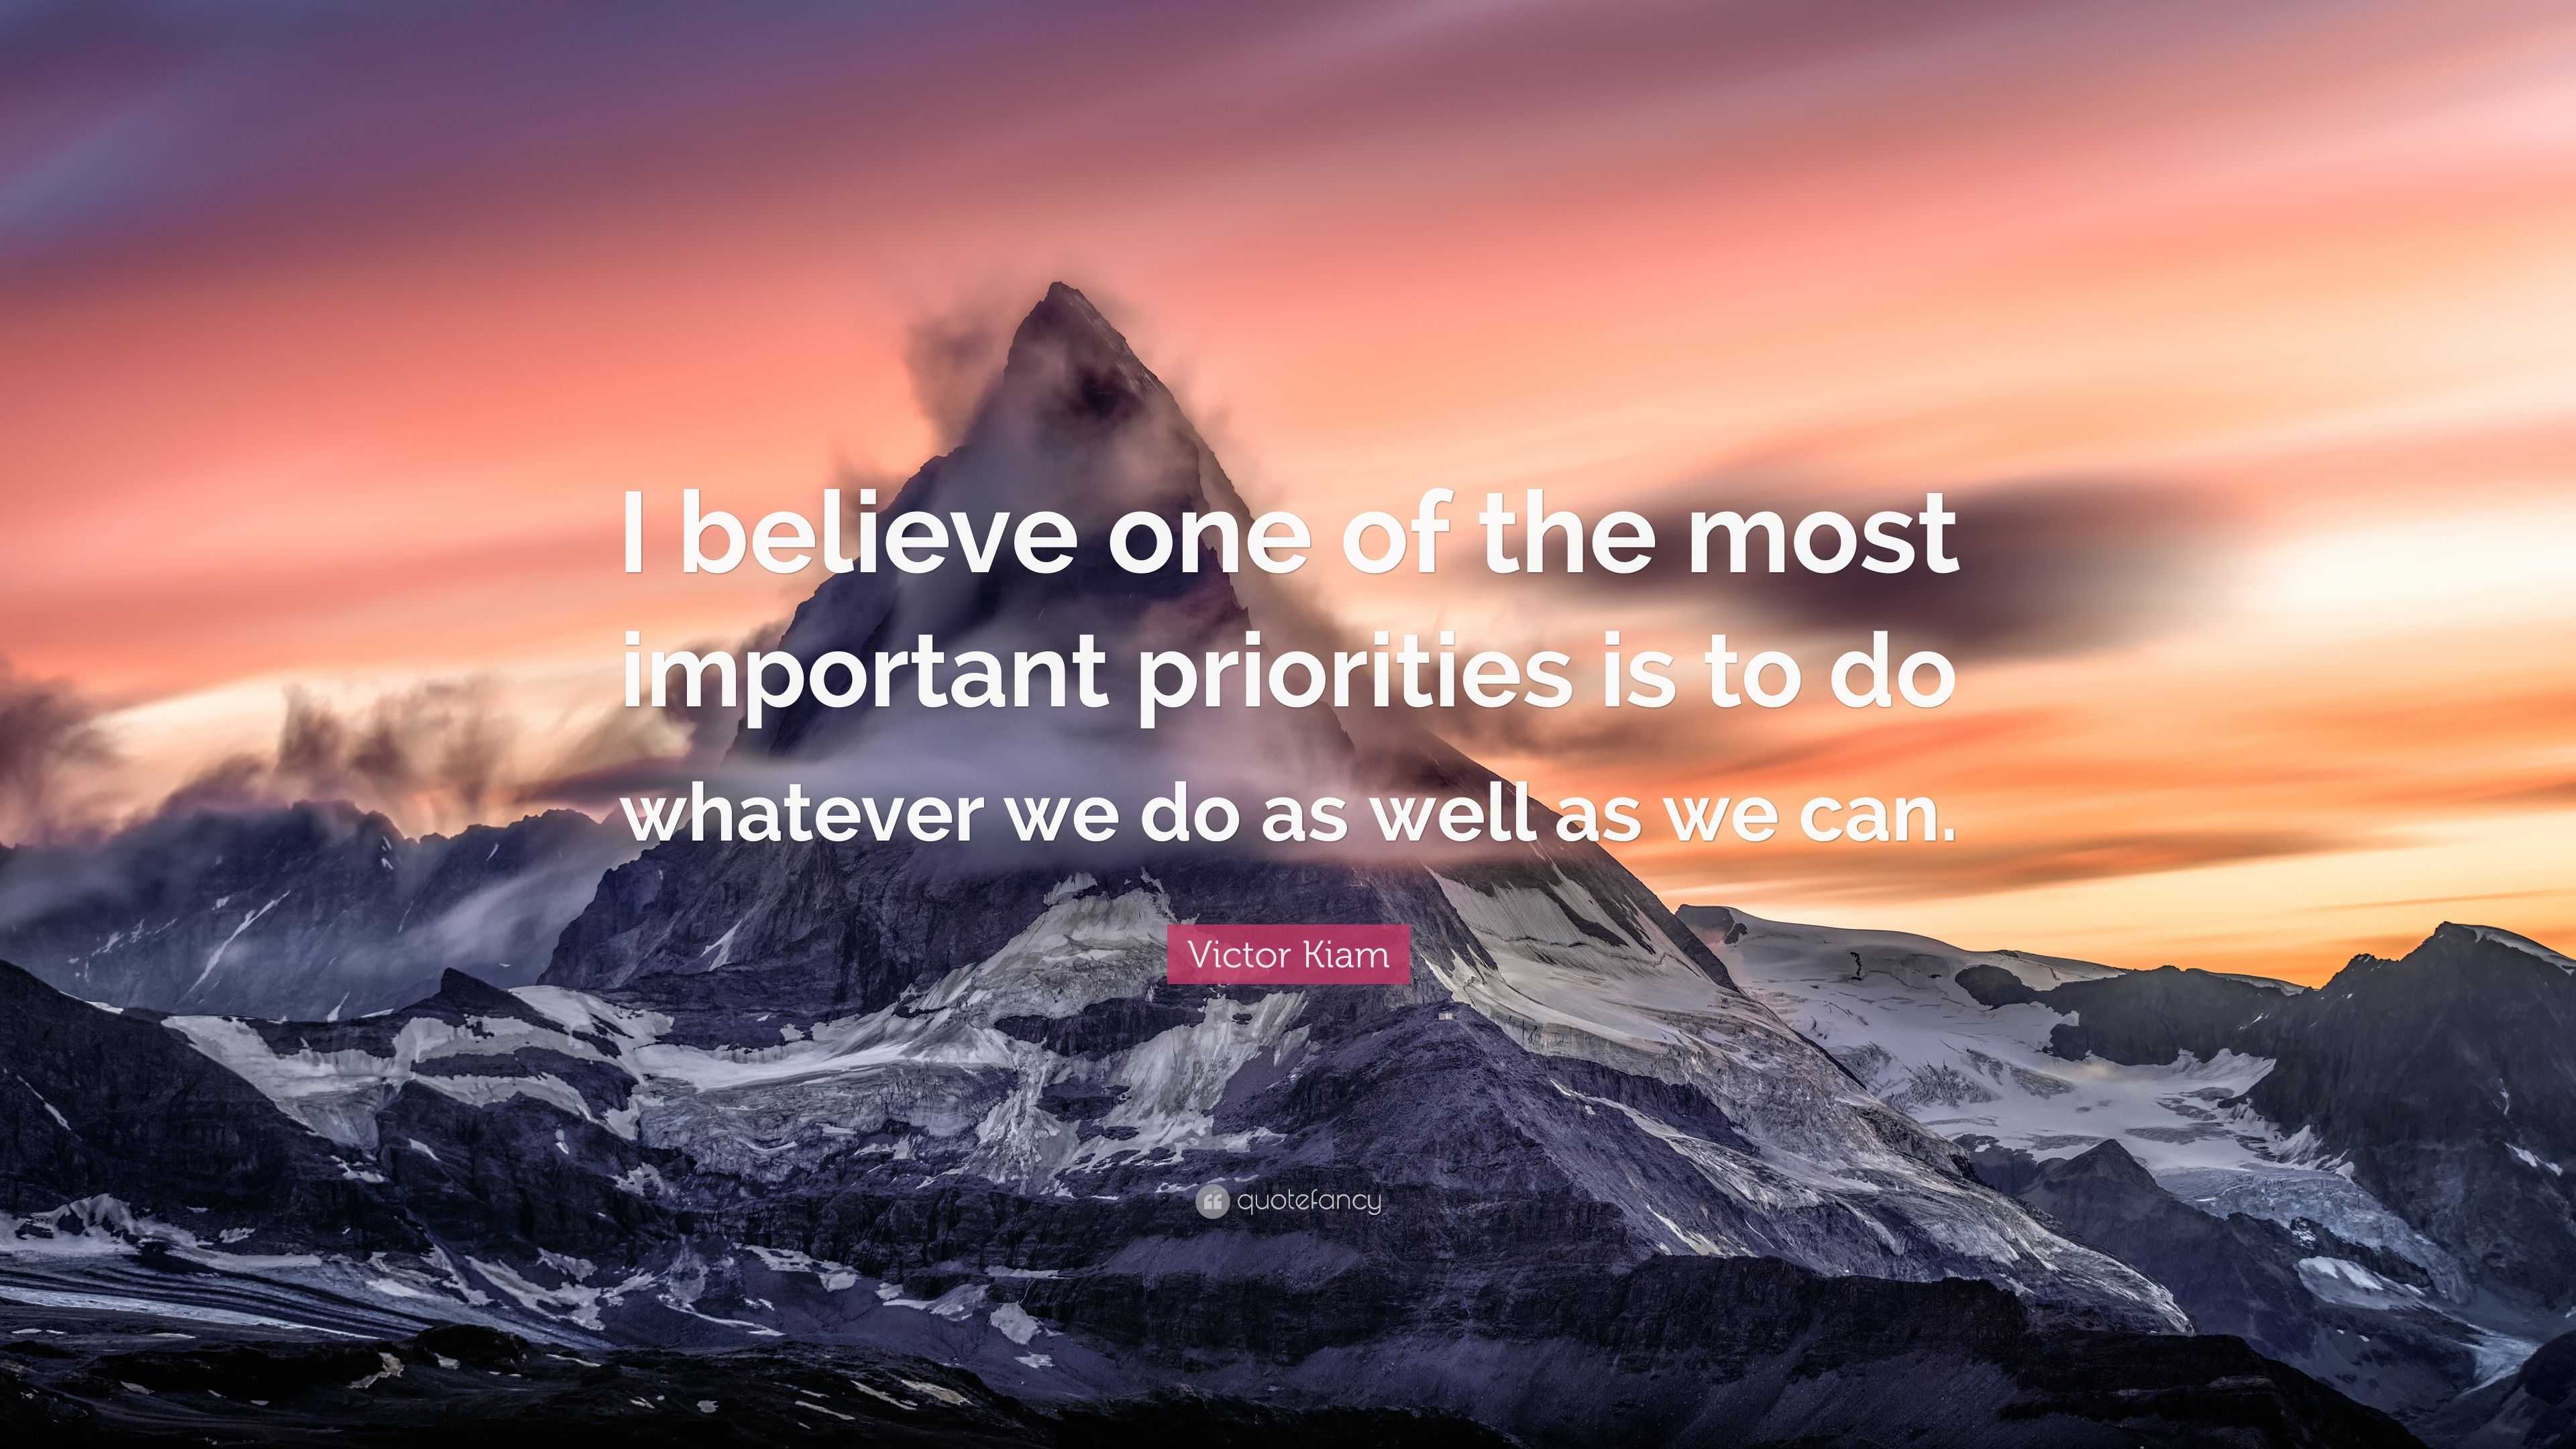 Victor Kiam Quote: “I believe one of the most important priorities is ...